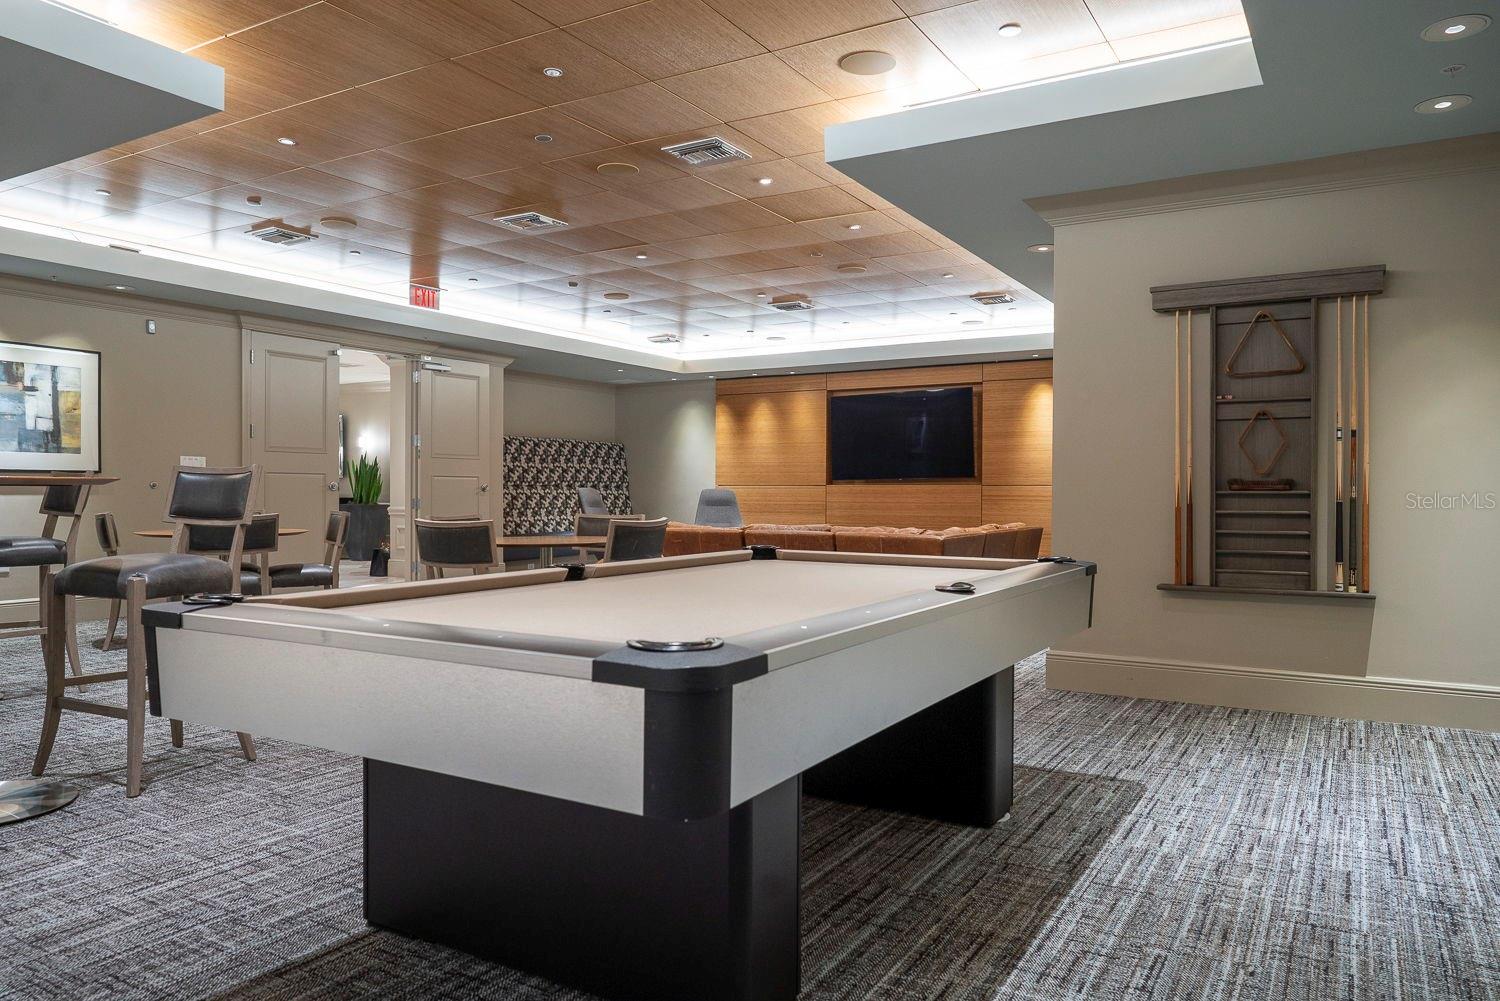 Spend time with friends and family in the entertainment room, featuring a billiards table, cafe/bar area, seating, and television.